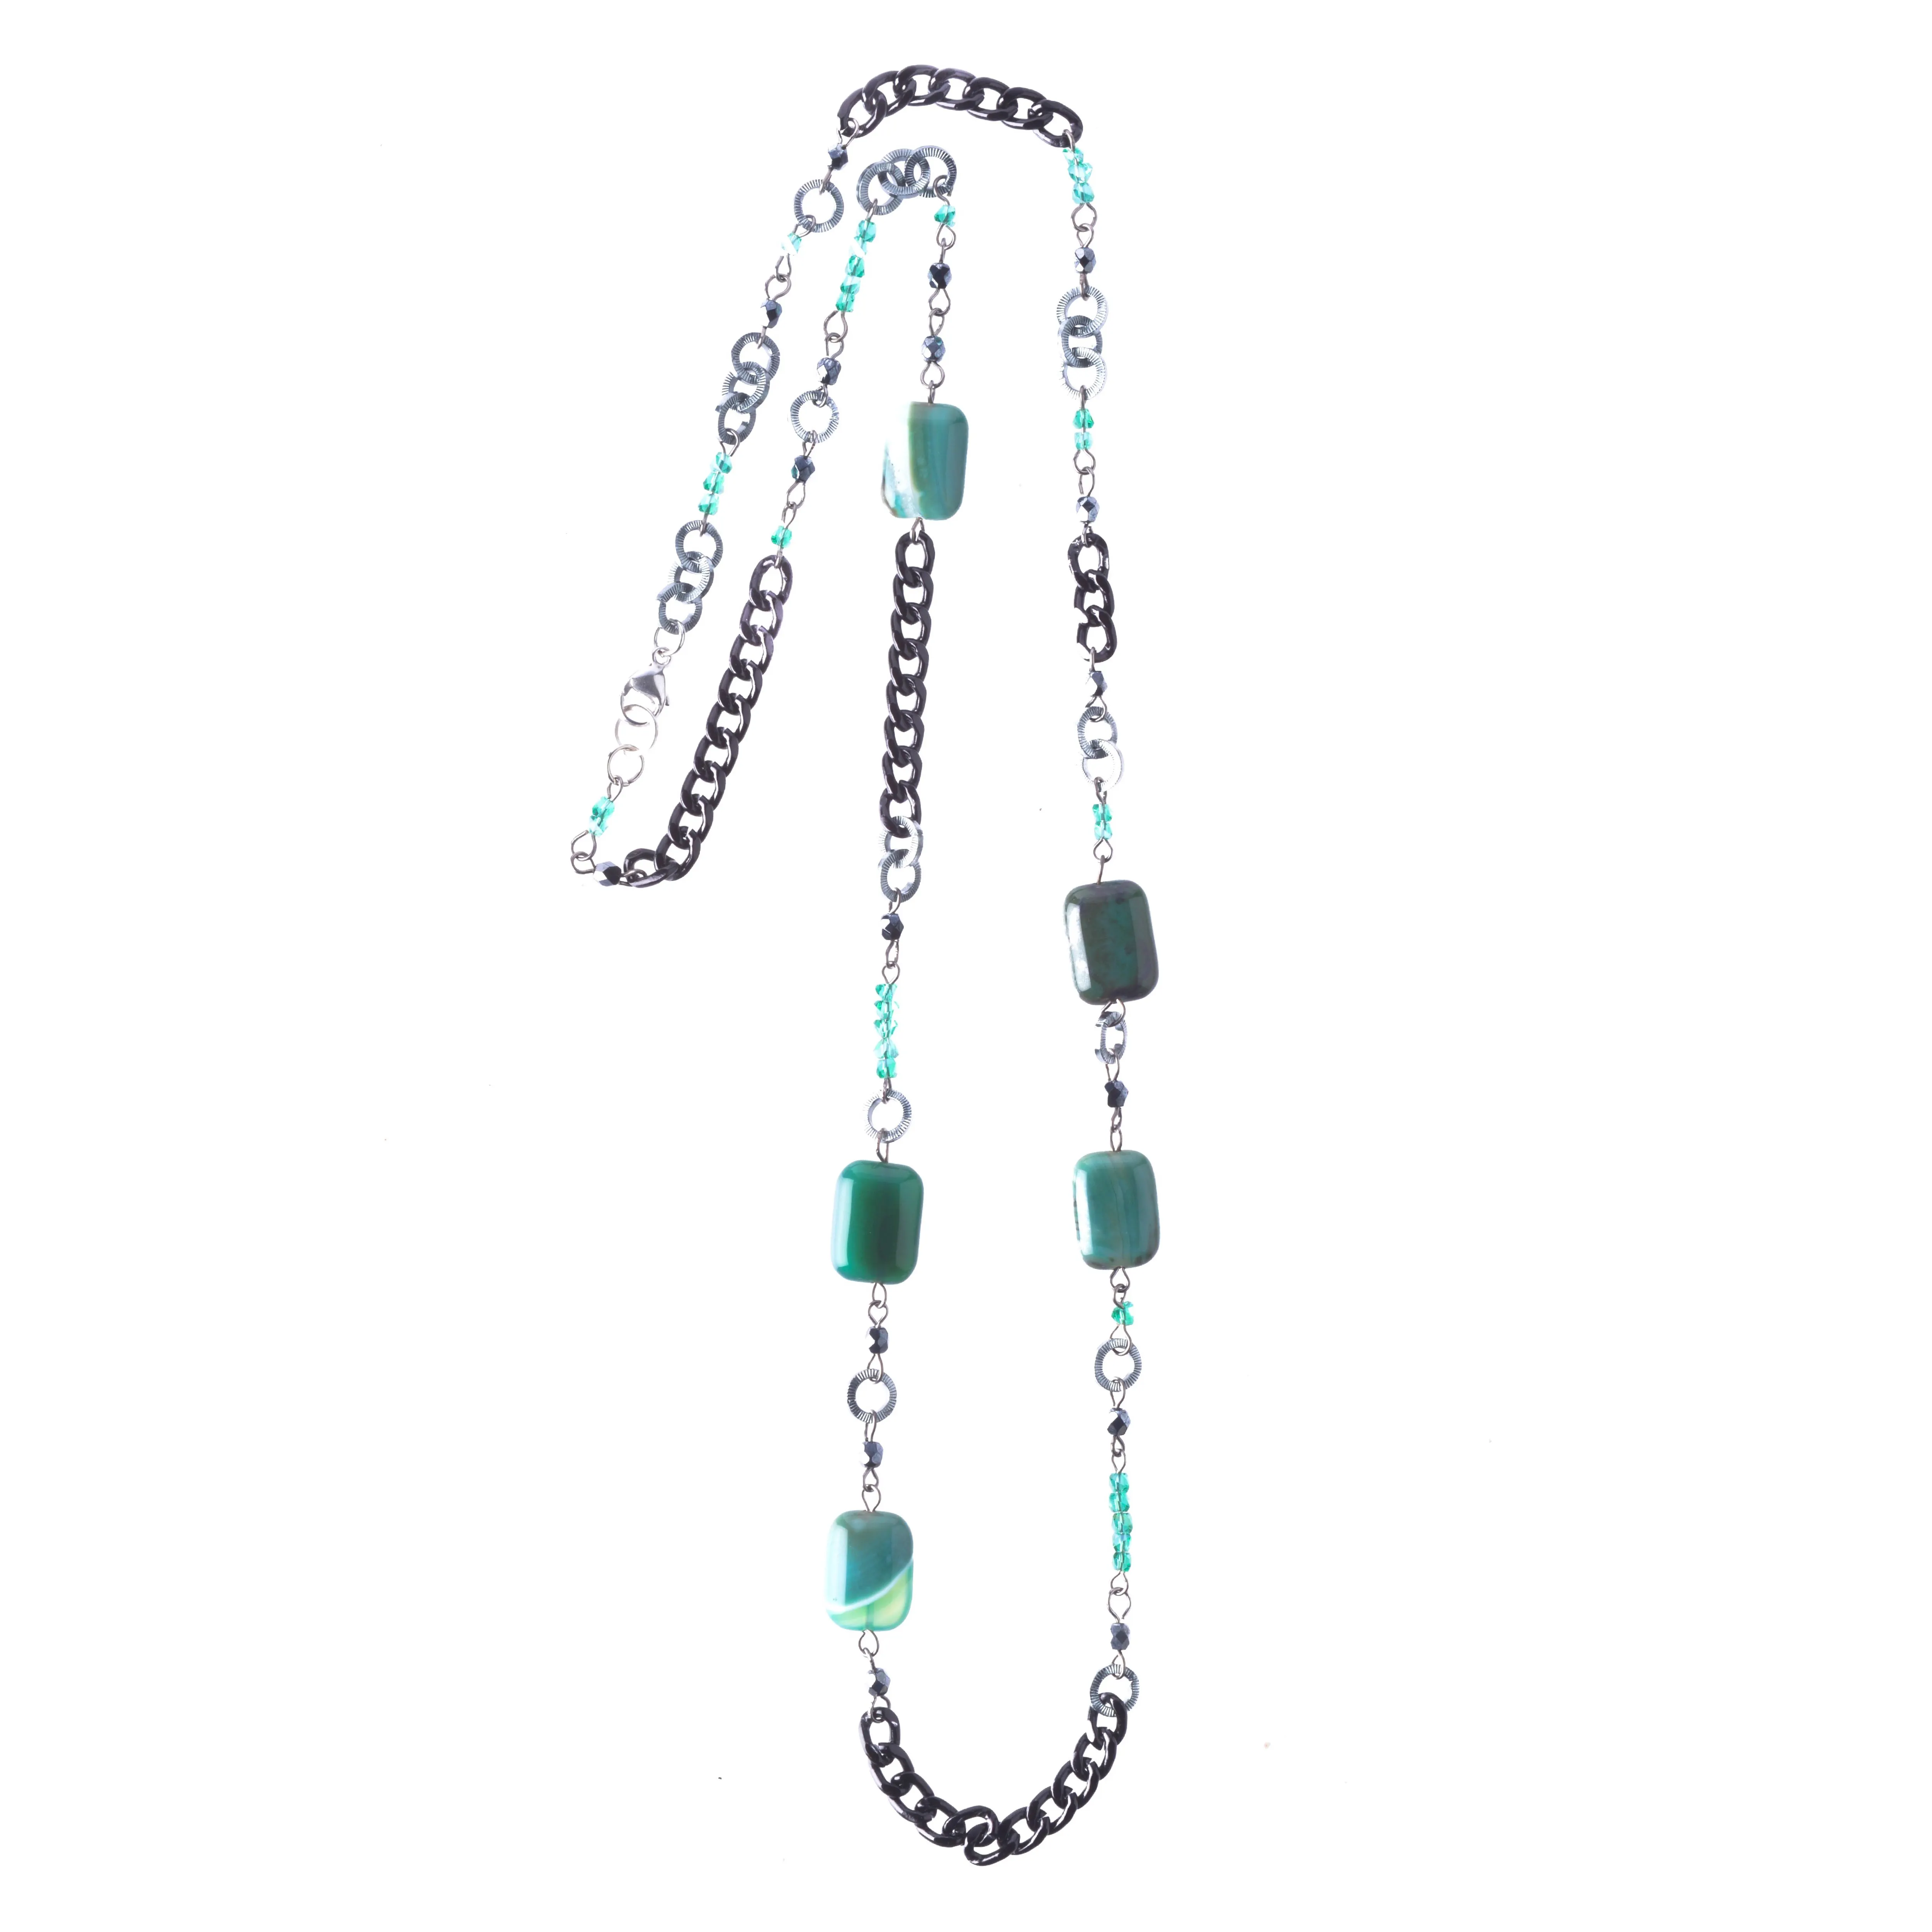 Necklace with black metal chain Long Green agate stones High quality materials For woman young look For every days